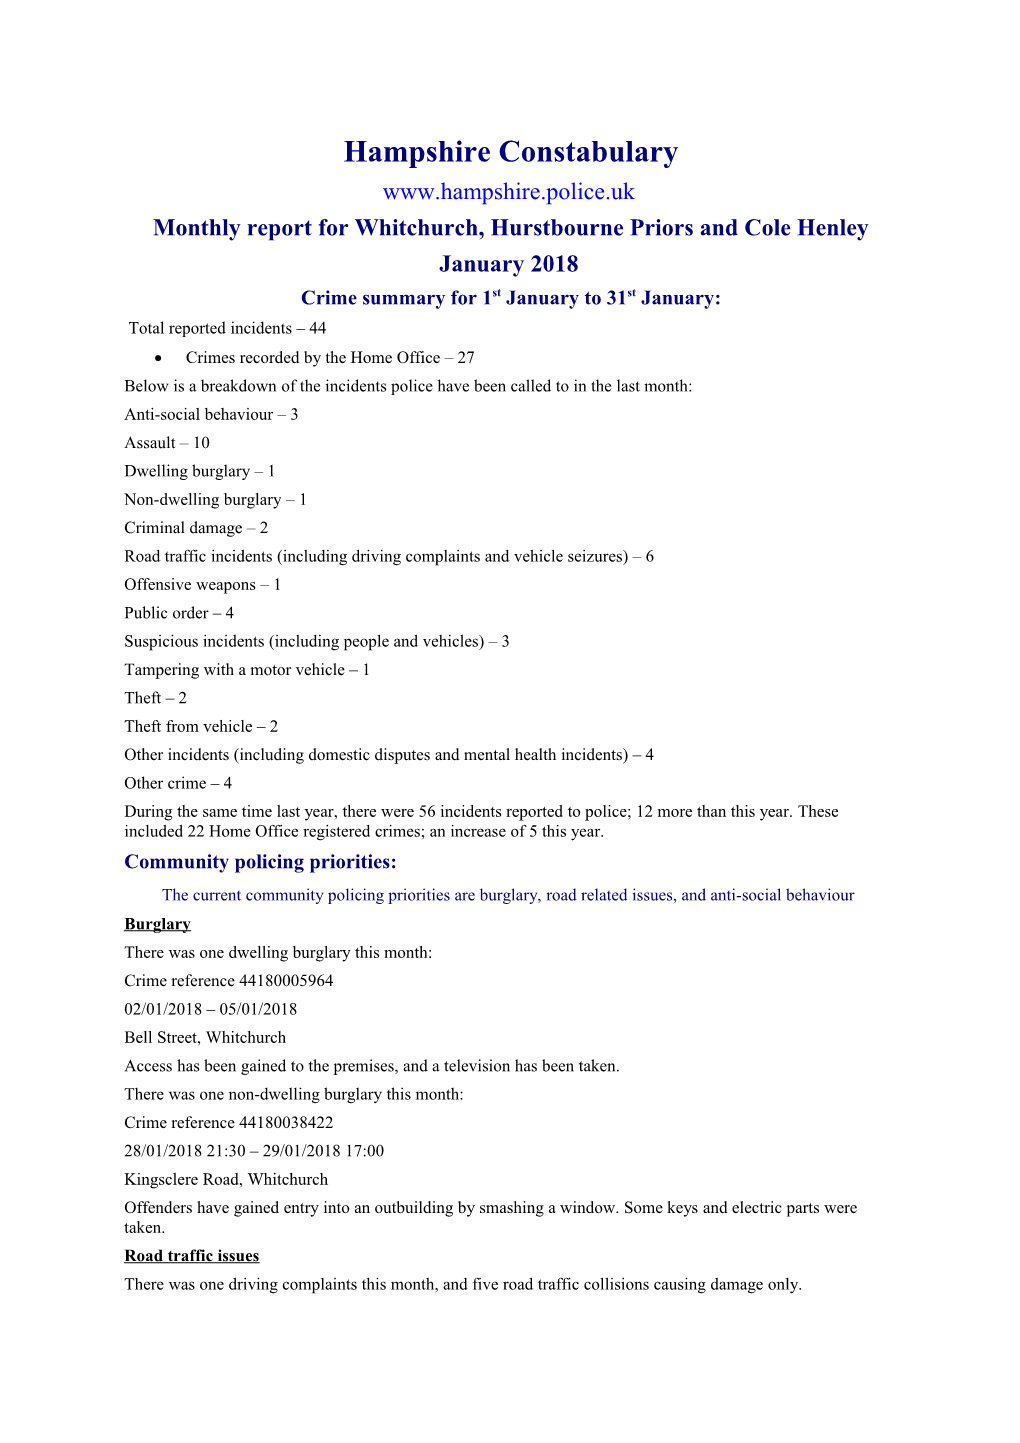 Monthly Report for Whitchurch, Hurstbourne Priors and Cole Henley